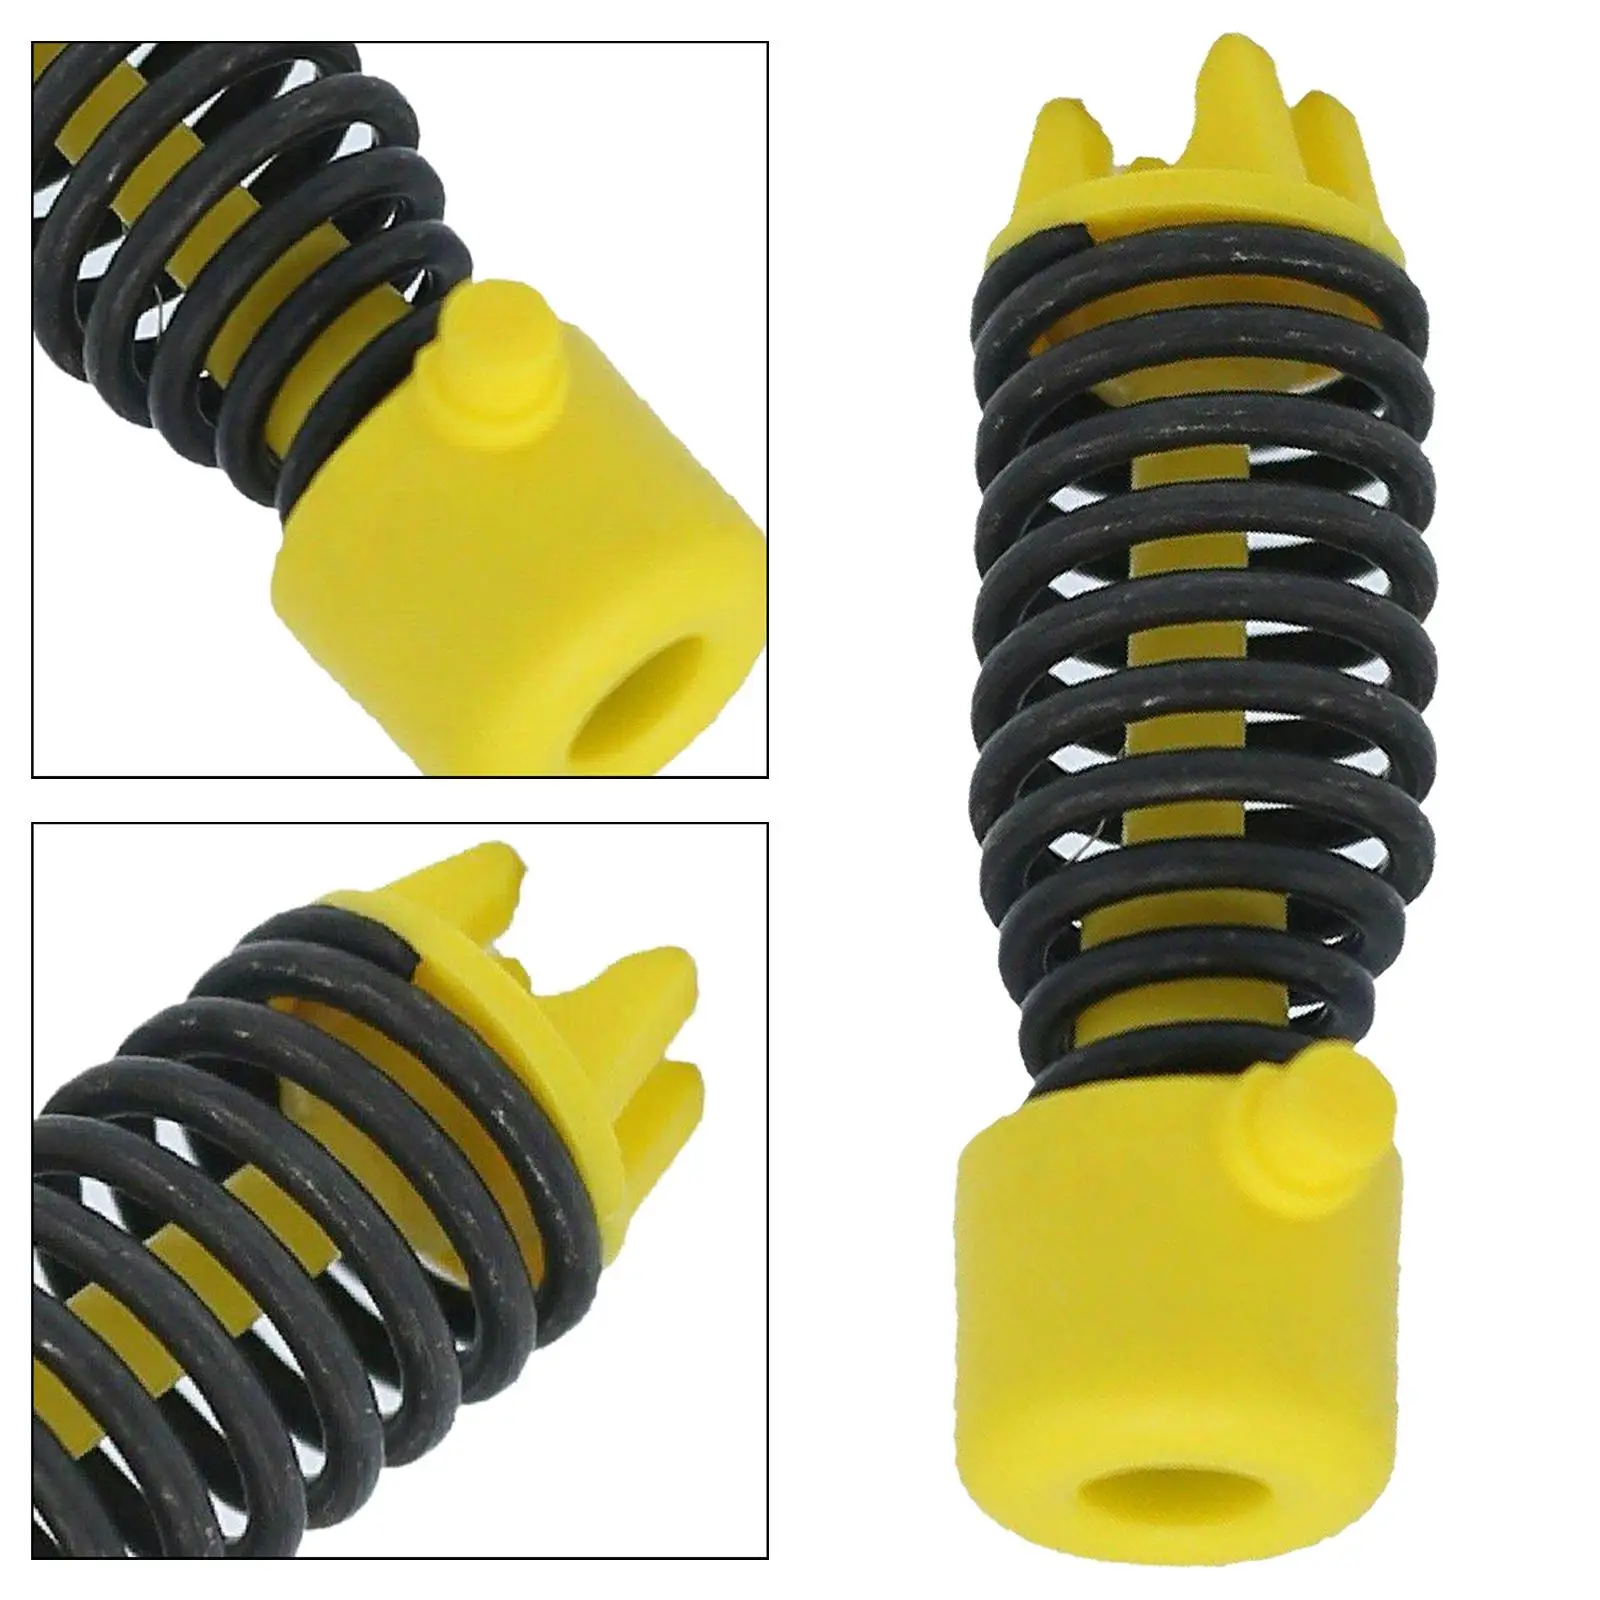 Brake Clutch Controls Spring Premium AV617A600CA High Performance 1713550 1736221 Replaces for Ford Kuga MK2 (2013 Onwards)